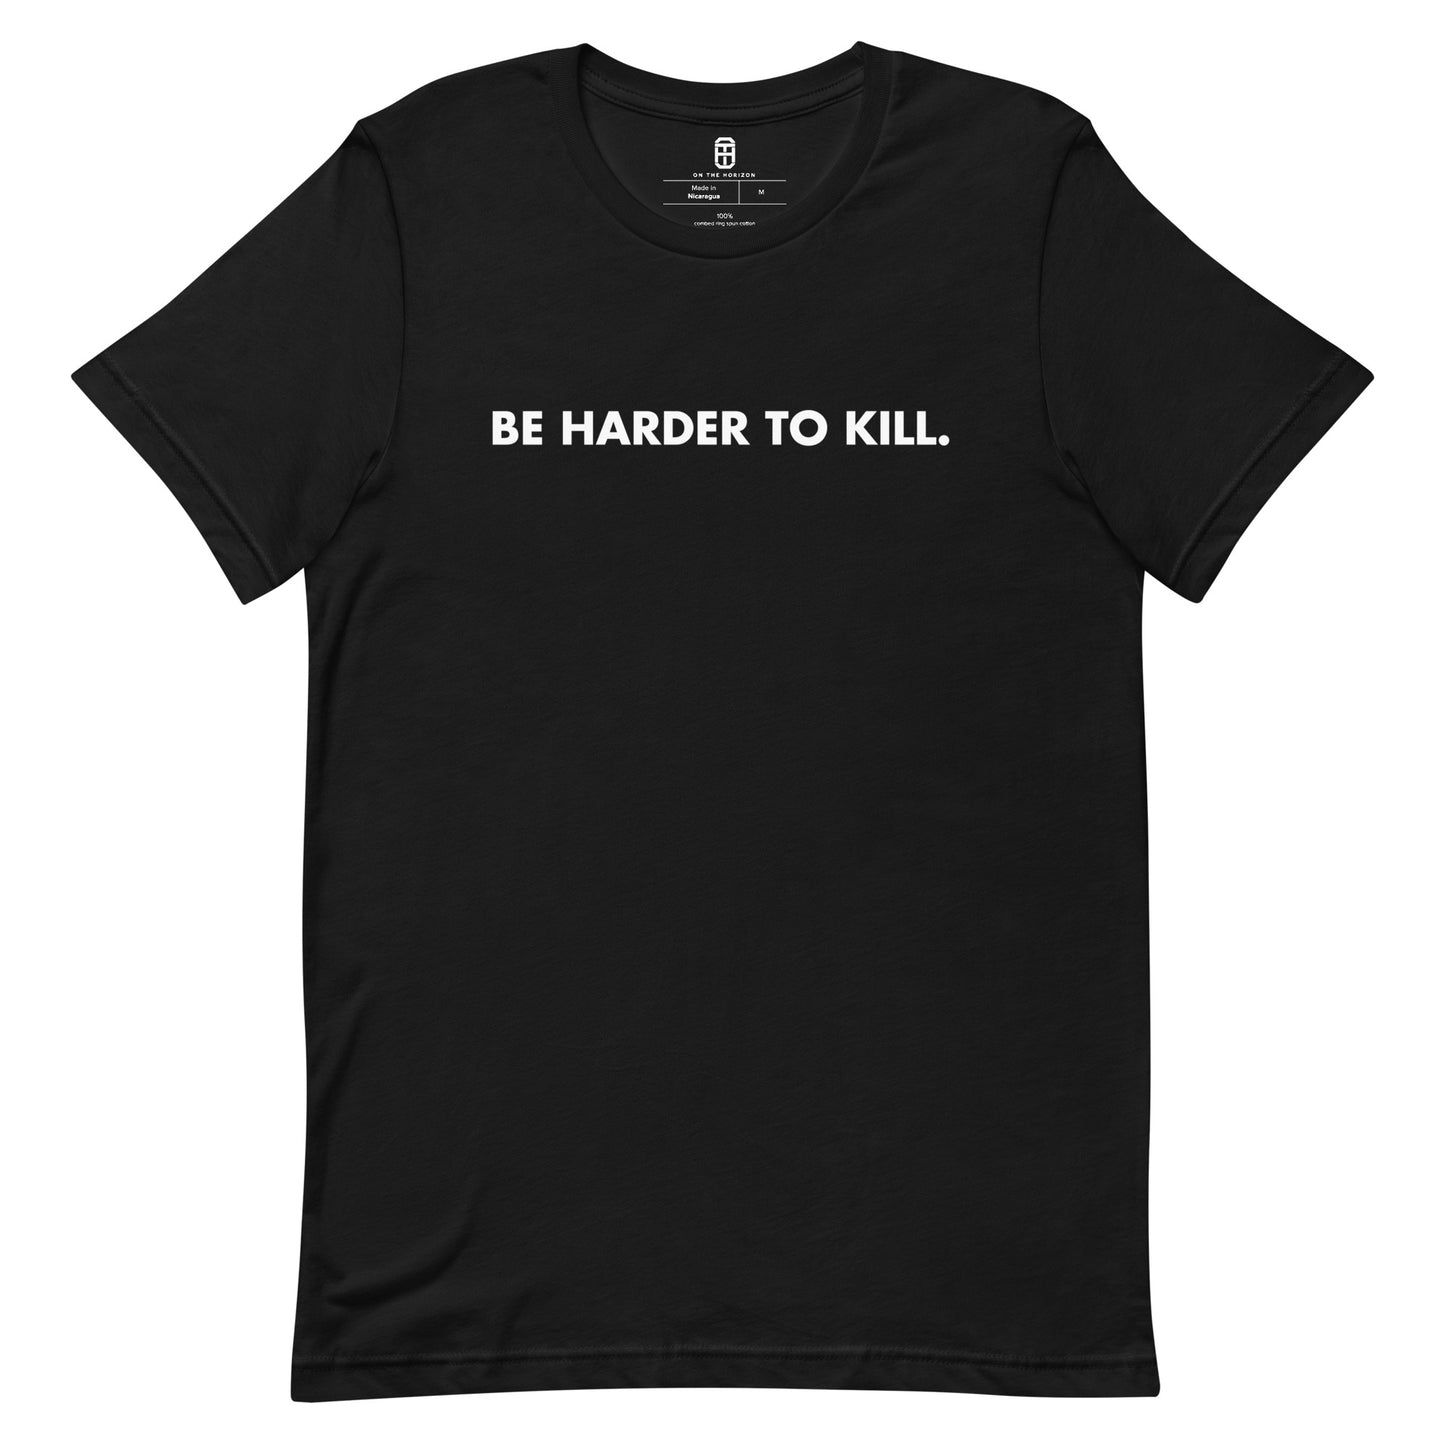 THE MINDSTRONG PROJECT BE HARDER TO KILL T-SHIRT (MORE COLORS)